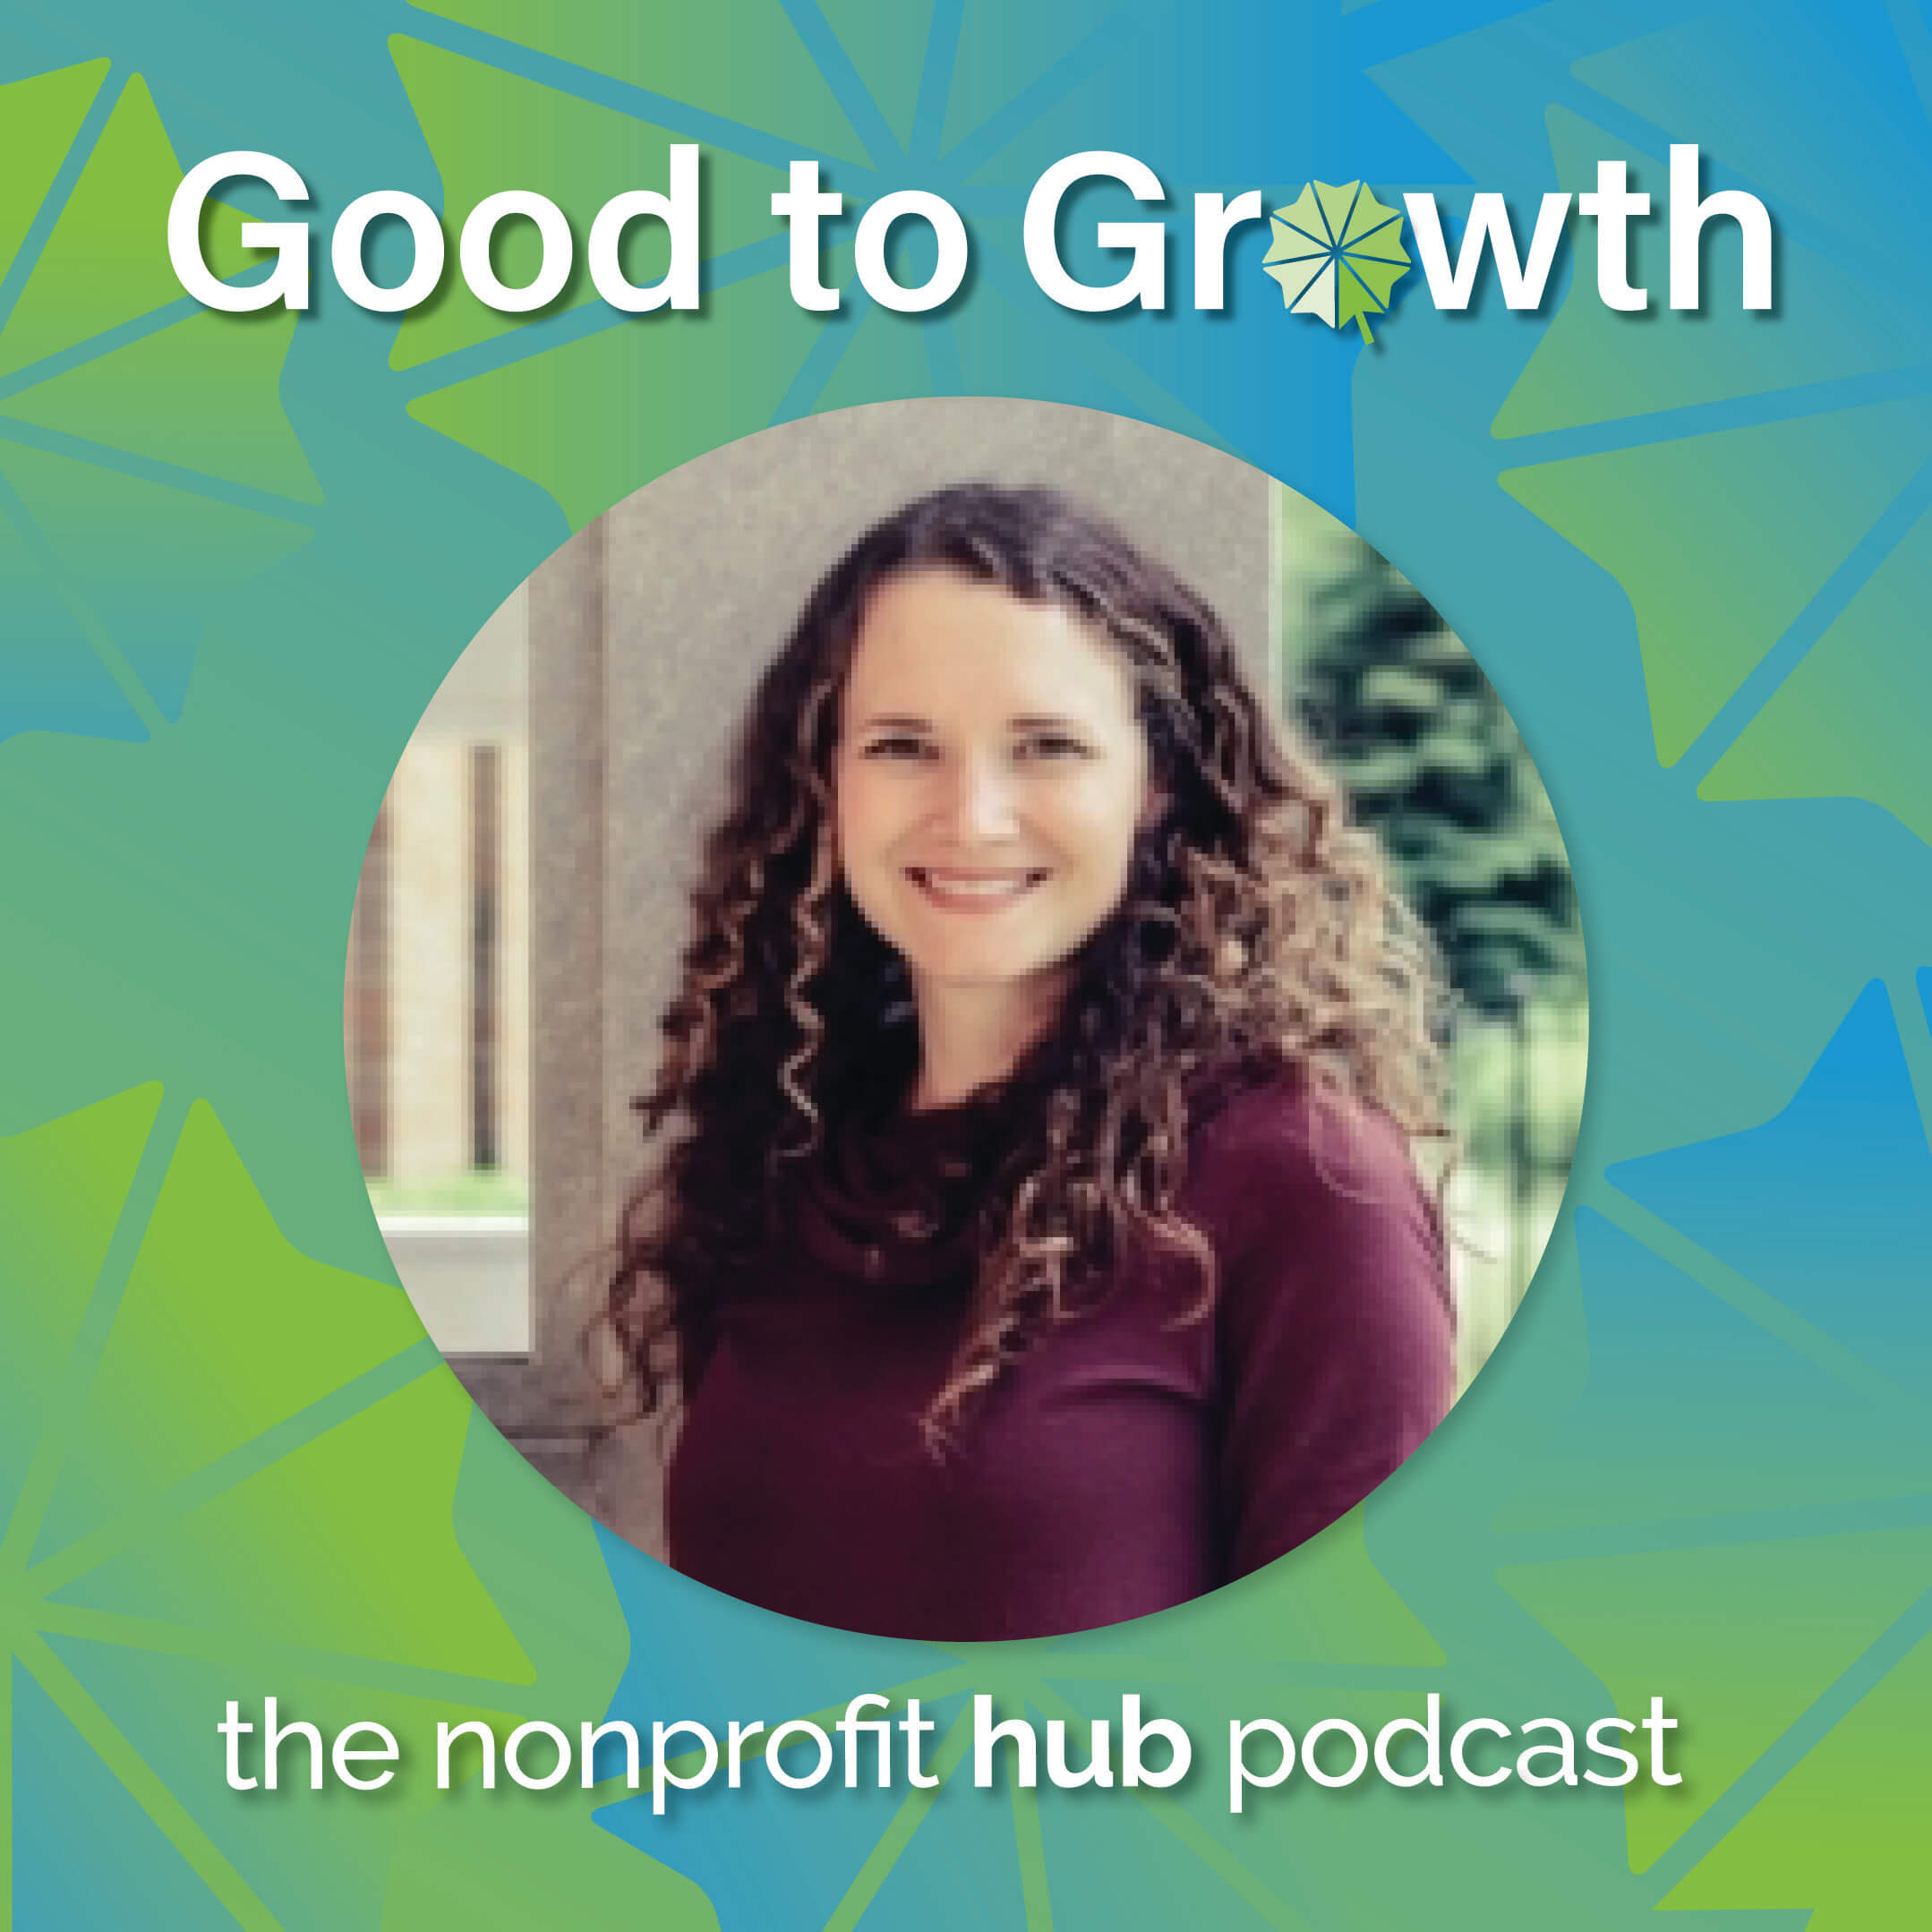 Krista Martin Good to Growth Podcast Image